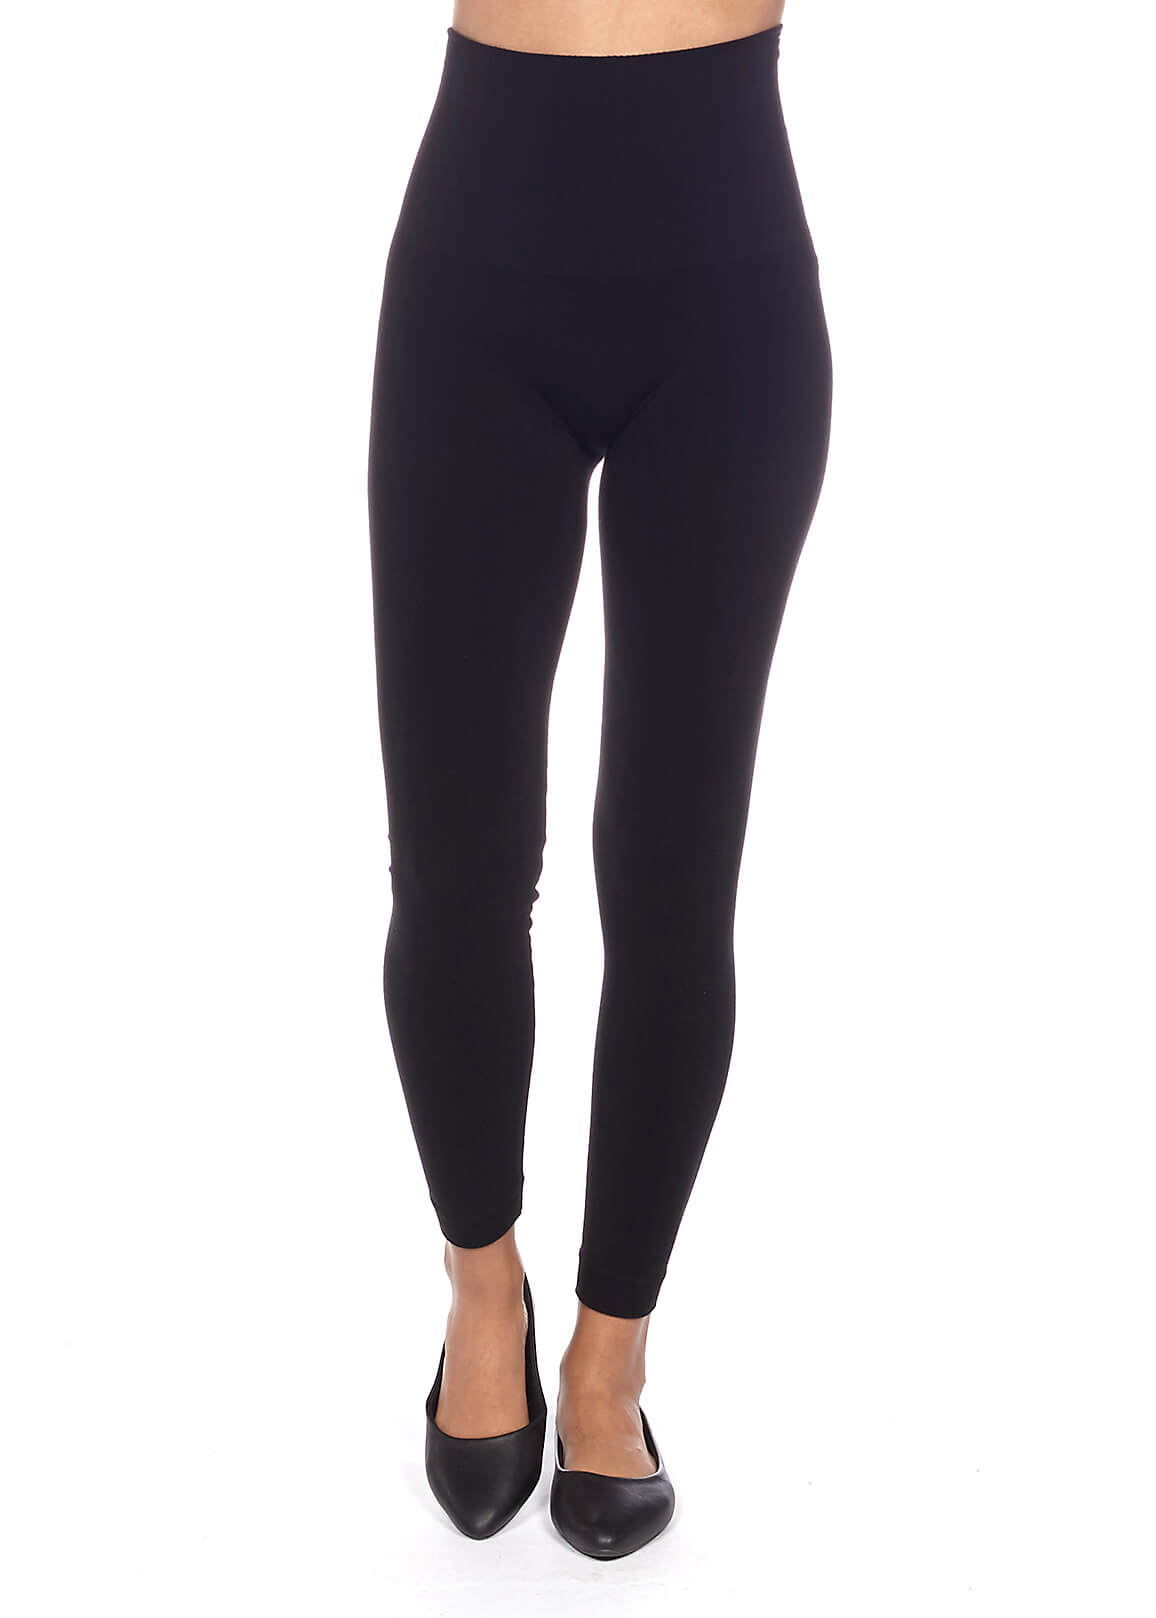 Bamboo Seamless Control-Top High-Waisted Legging with 6